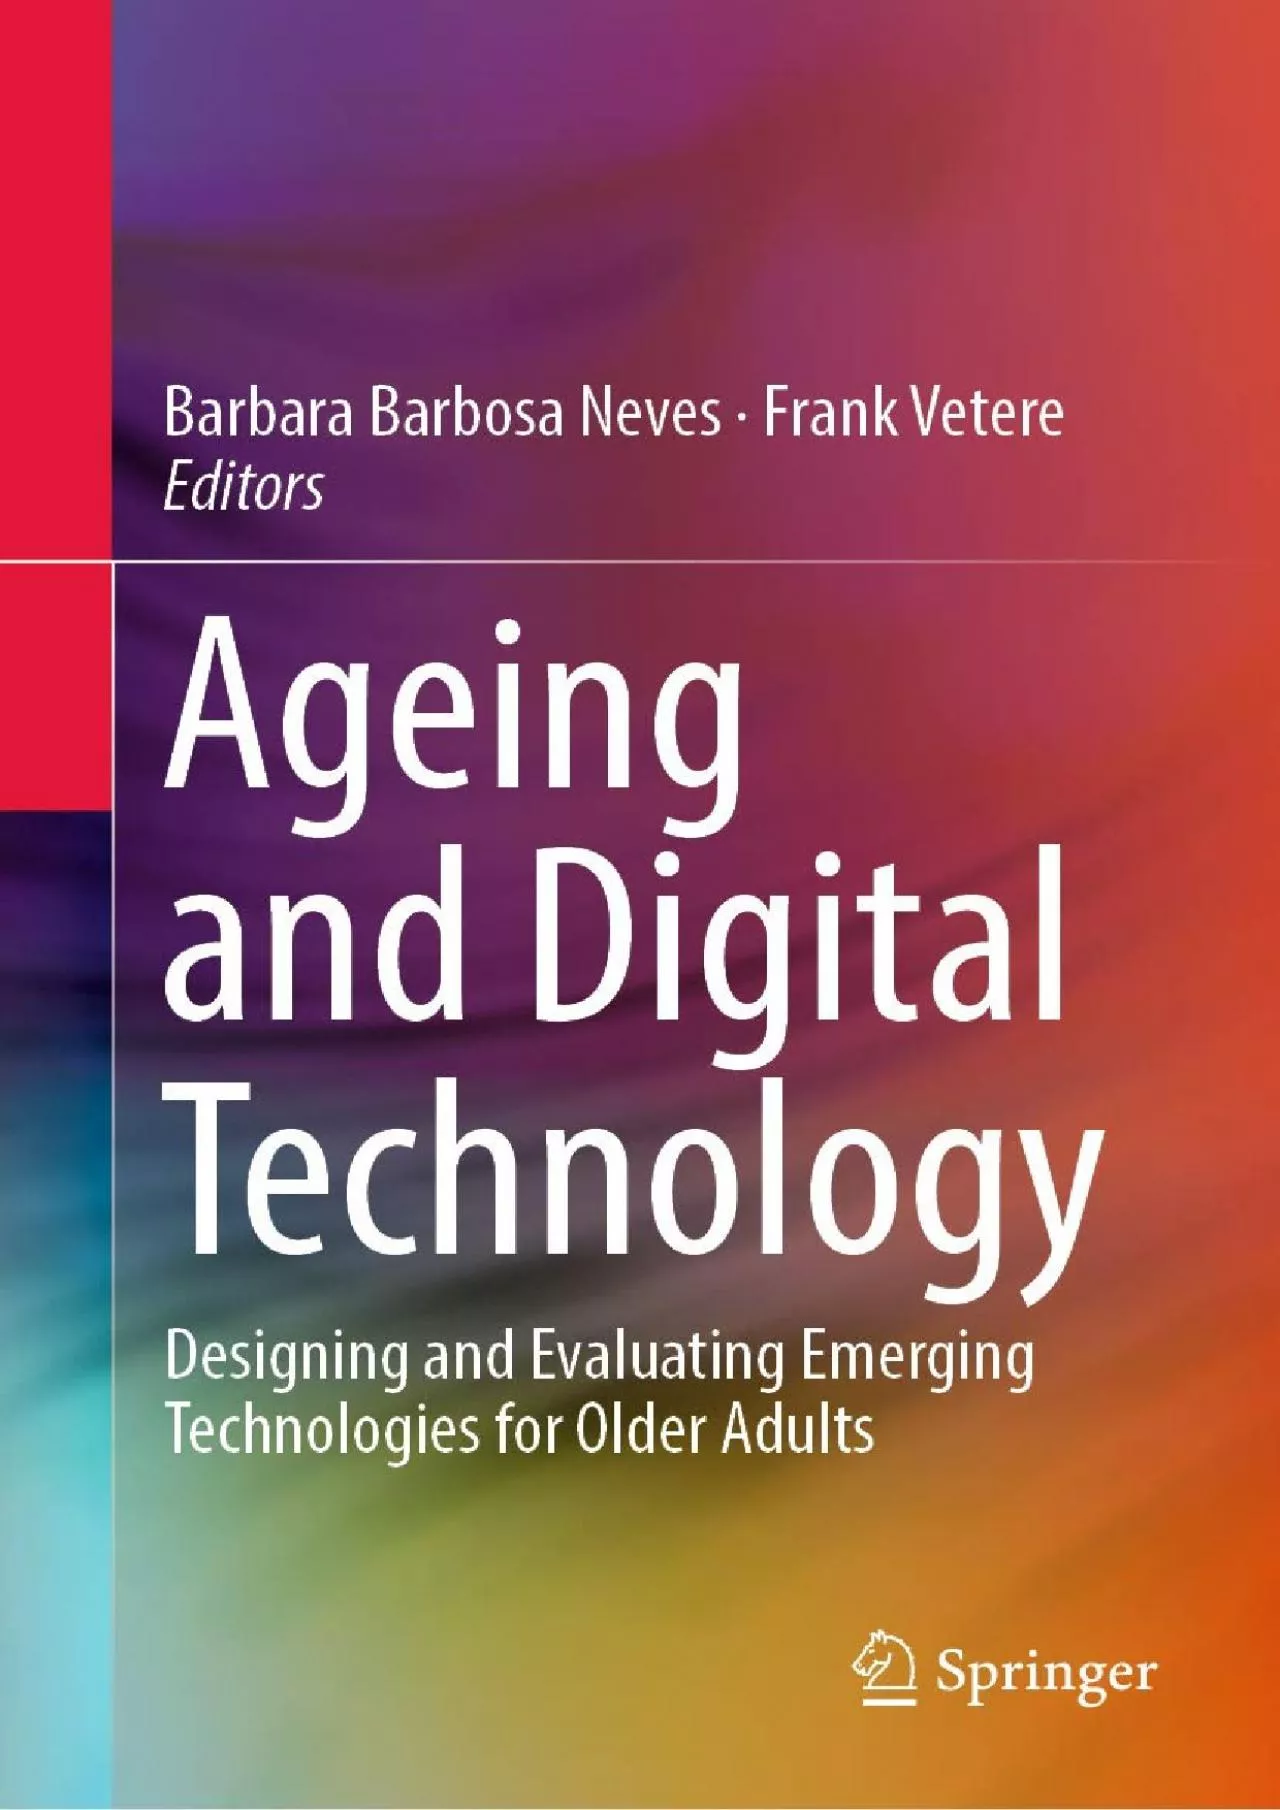 (BOOK)-Ageing and Digital Technology Designing and Evaluating Emerging Technologies for